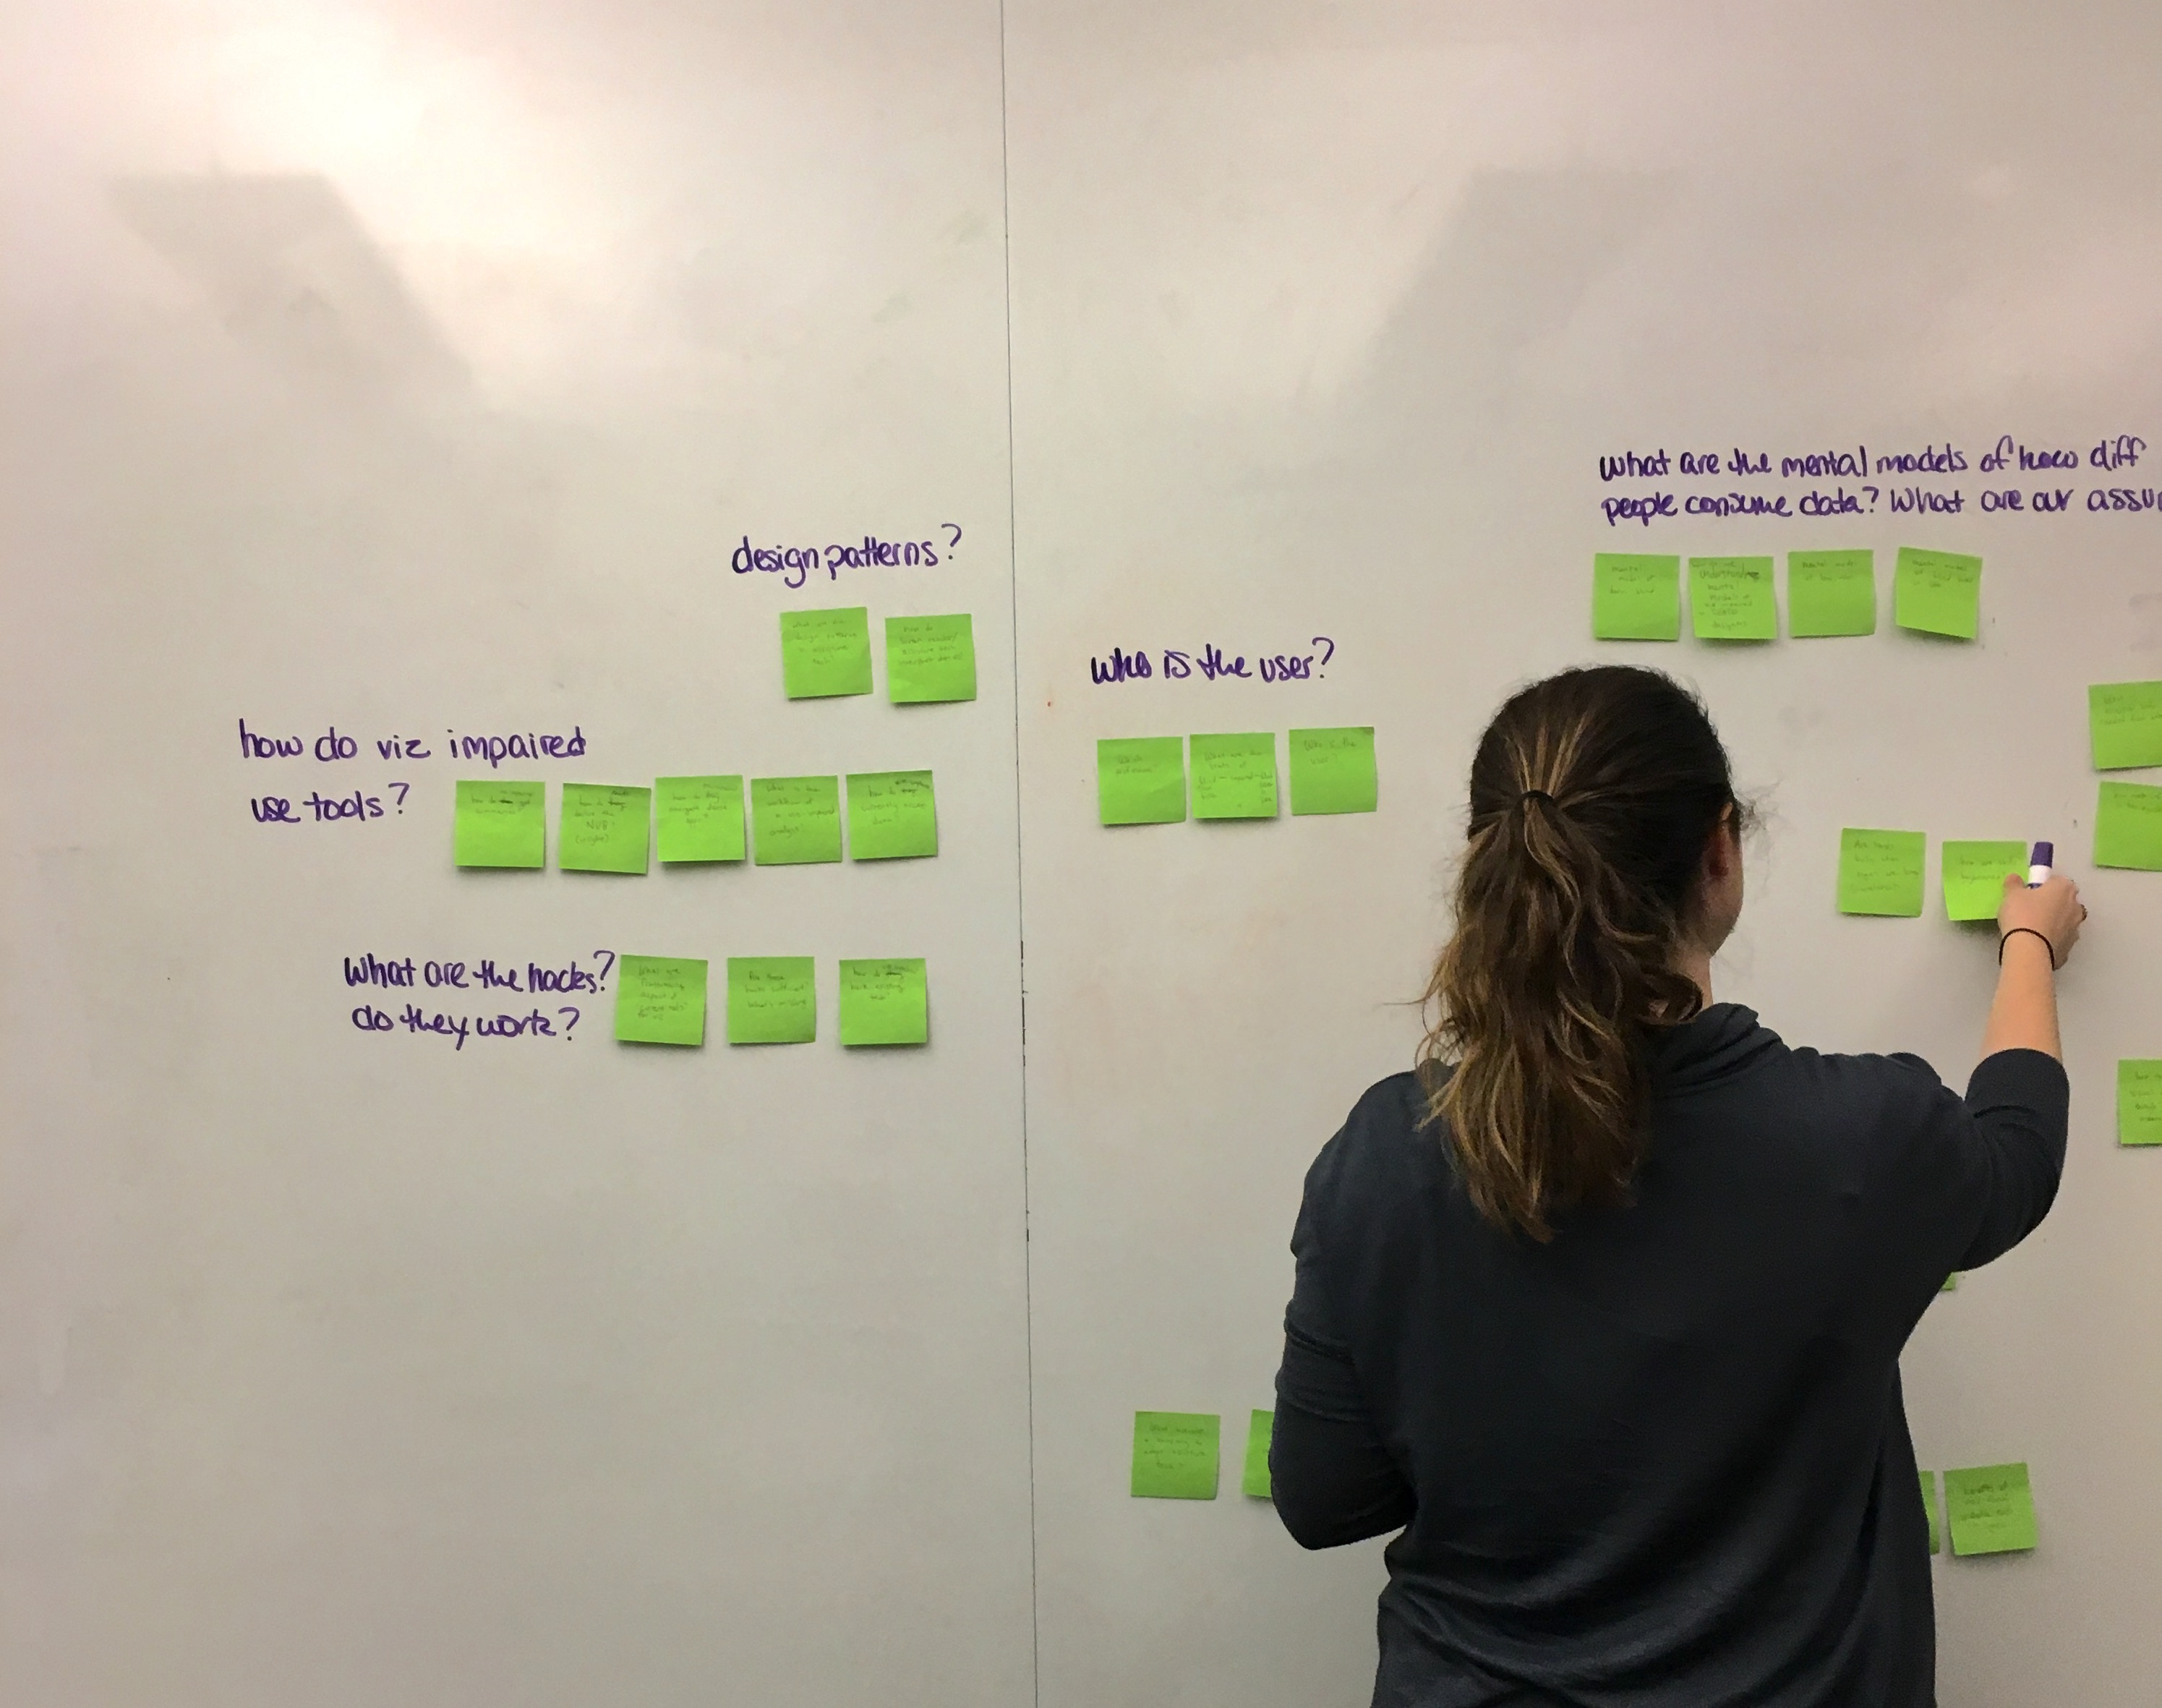 A woman stands in front of a wall with green post it notes grouped in clusters with written questions above them reading 'how do viz impaired use tools?,' 'What are the hacks? Do they work?,' 'design patterns,' 'who is the user?,' 'what are the mental models of how diff people consume data? What are our assu...'